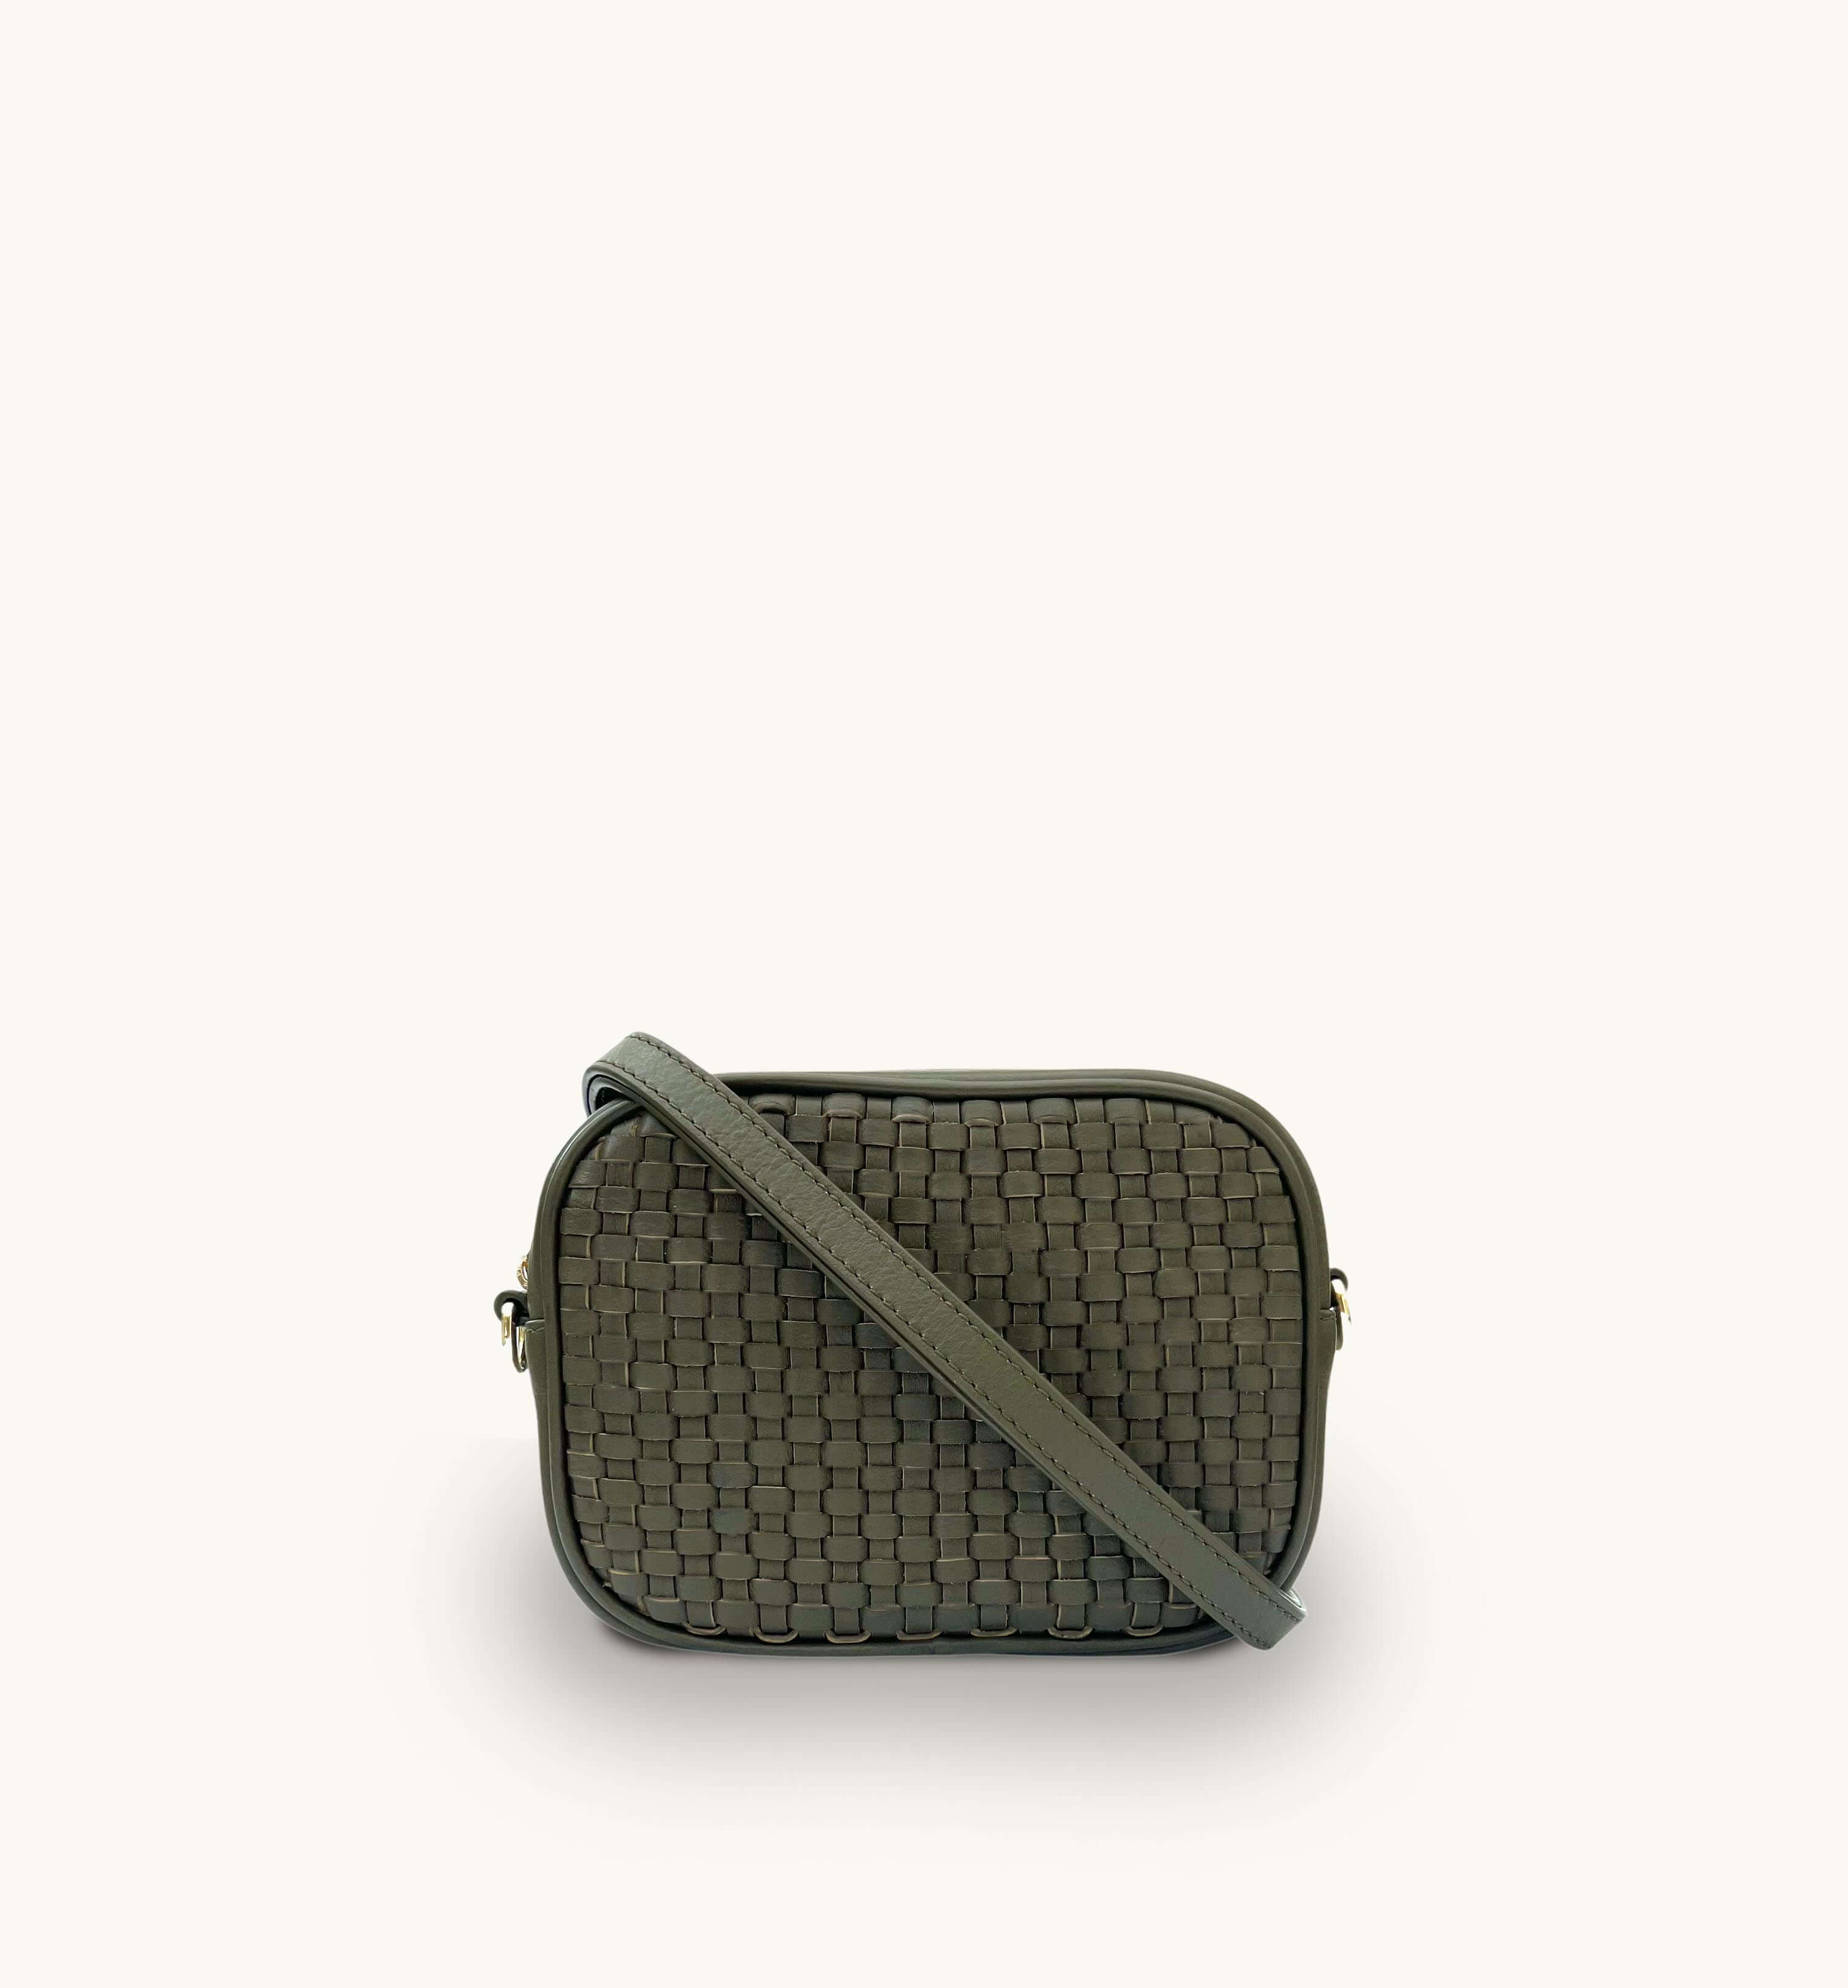 Apatchy London The Penelope Olive Woven Leather Camera Bag